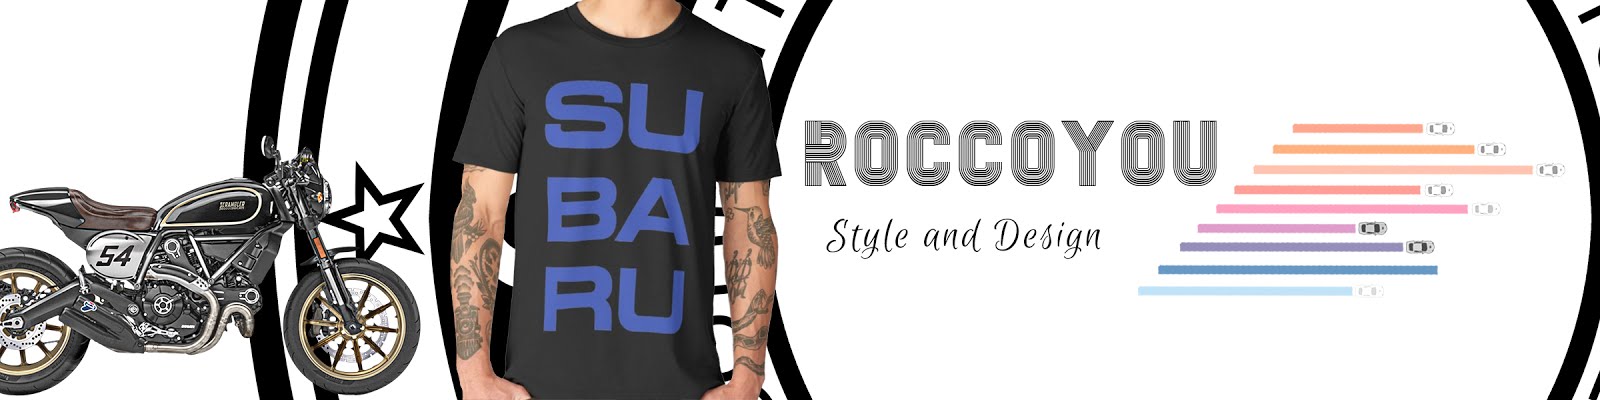 RoccoYou Apparel and Accessories